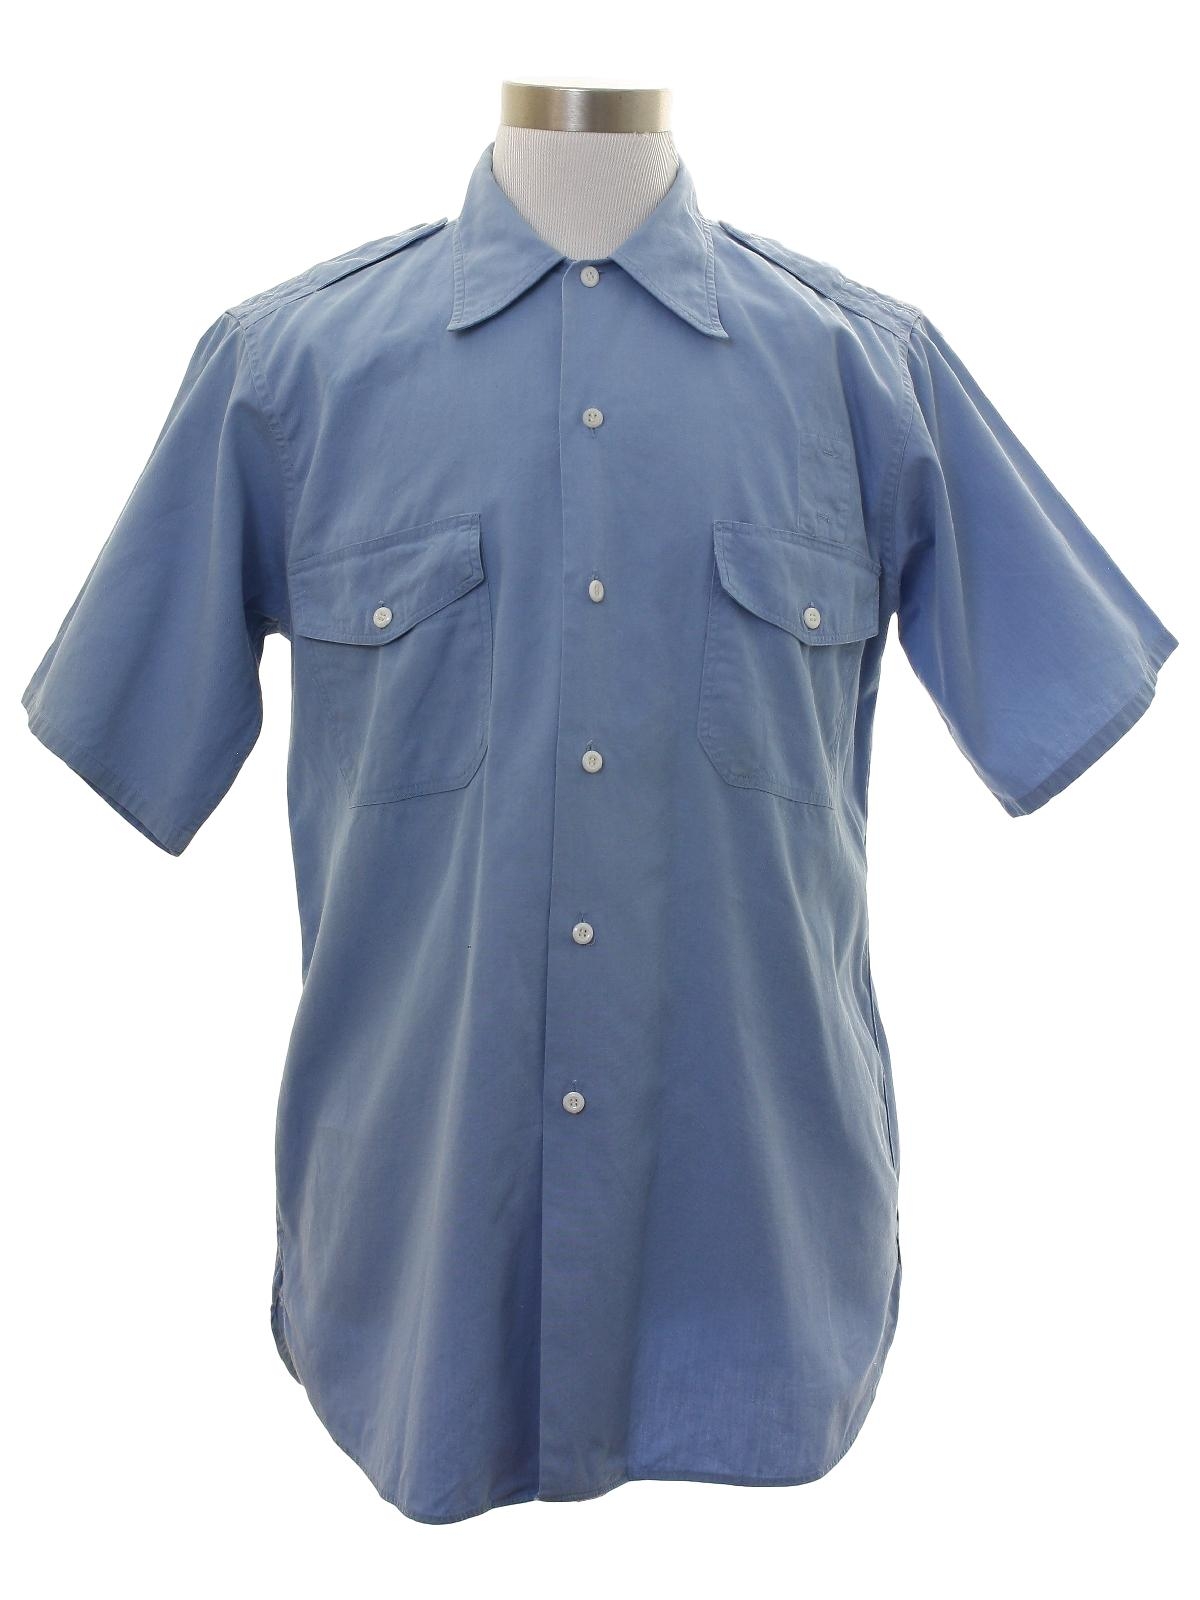 1950's Retro Shirt: Late 50s or Early 60s -Southern Uniform Co.- Mens ...